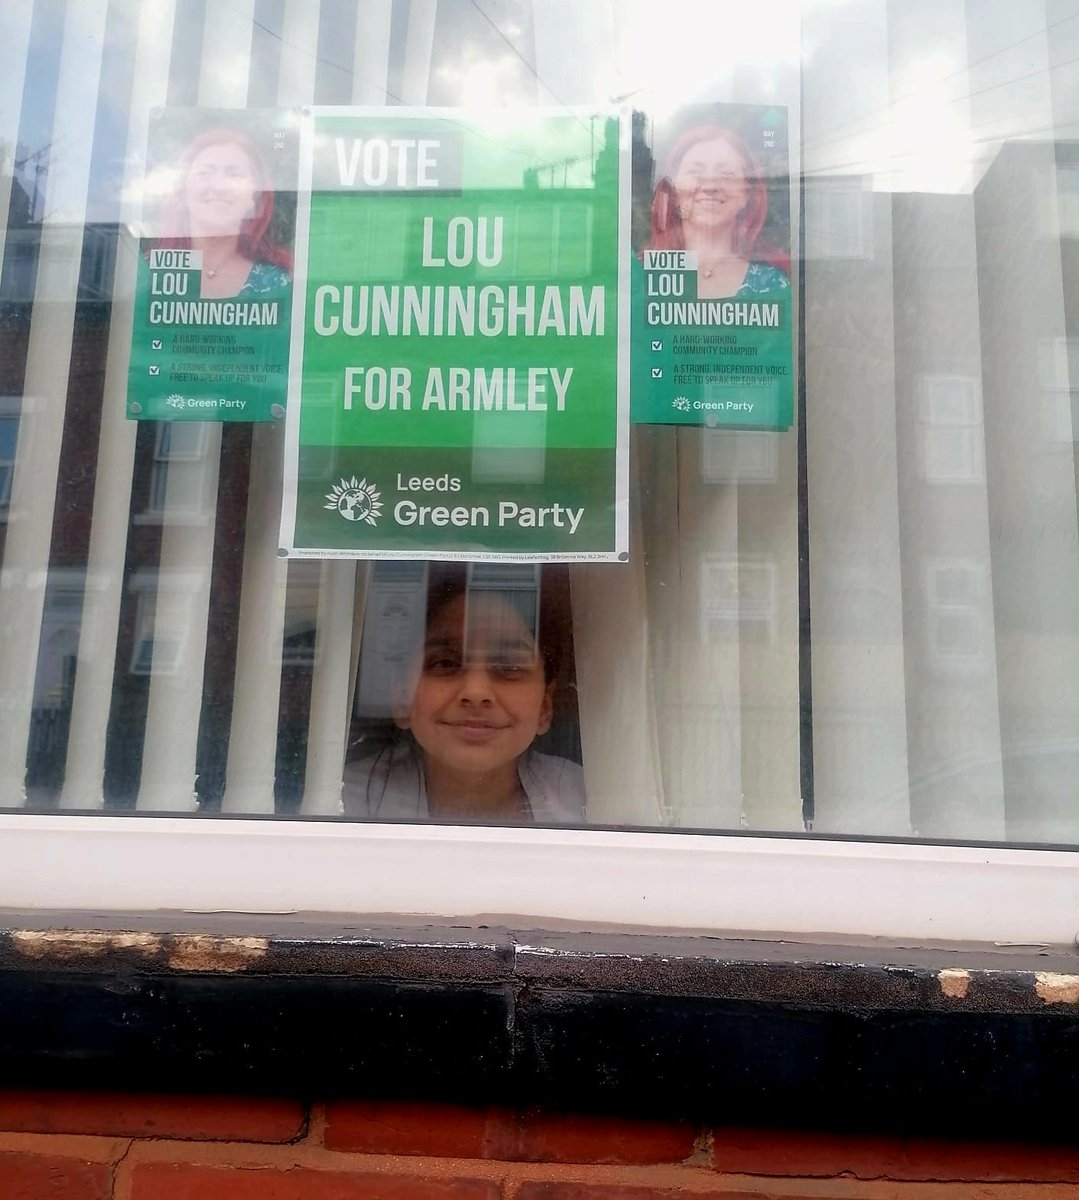 one of my favourite photos from the past few weeks 💚🙏💚 
let's make history together 💚 armley 🫂

#louforarmley #LocalElections2024 #armley
#VoteGreen 

this post is promoted for Lou Cunningham on behalf of K.Whitakker at 6 Lilac Grove Armley.